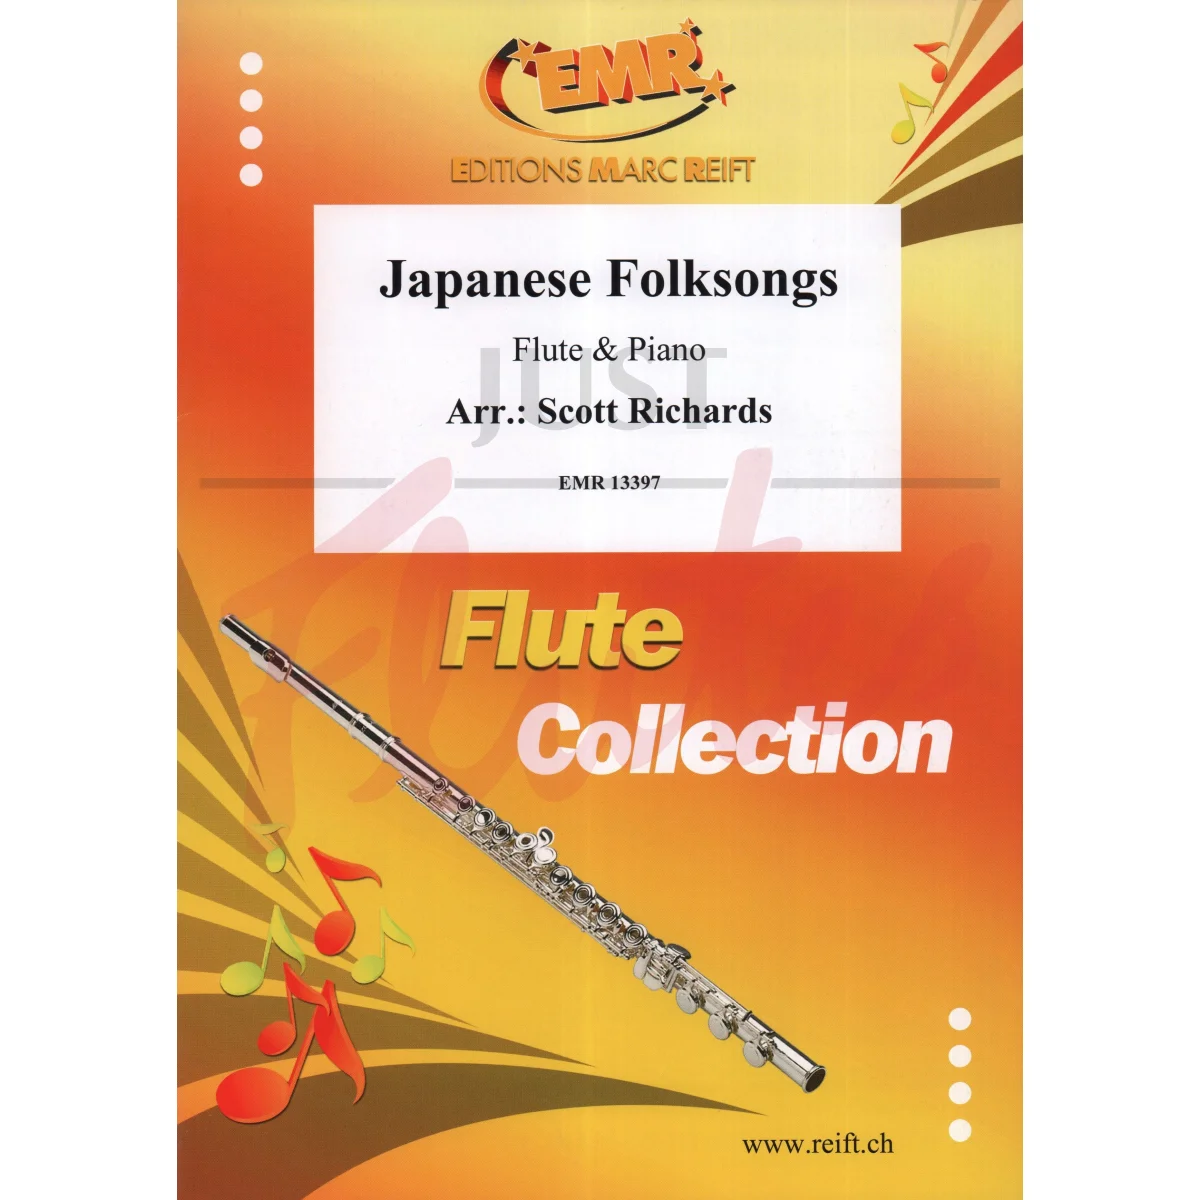 Japanese Folksongs for Flute and Piano